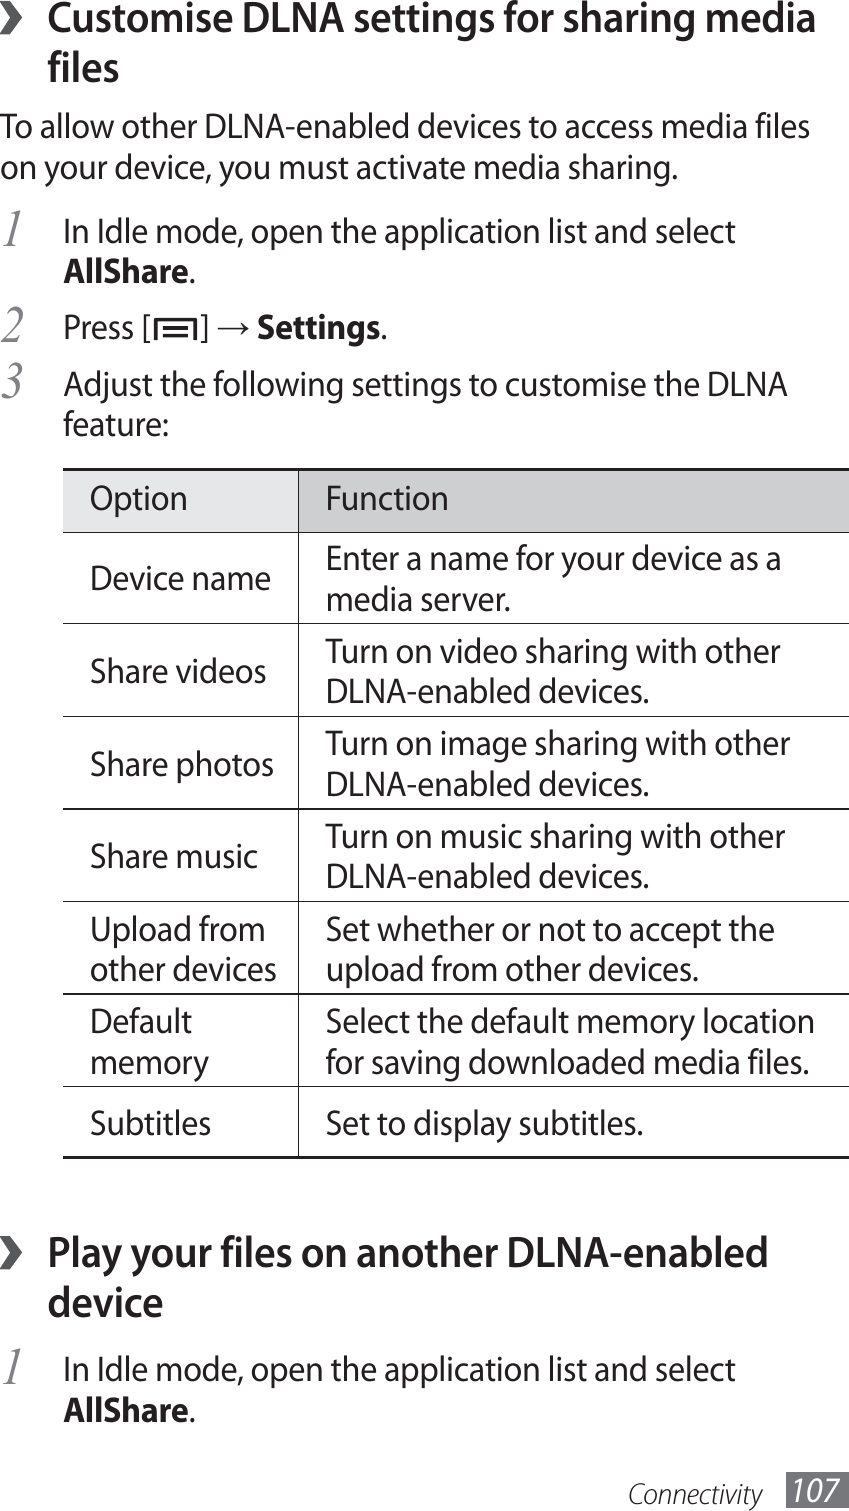 Connectivity 107Customise DLNA settings for sharing media  ›filesTo allow other DLNA-enabled devices to access media files on your device, you must activate media sharing. In Idle mode, open the application list and select 1 AllShare.Press [2 ] → Settings.Adjust the following settings to customise the DLNA 3 feature:Option FunctionDevice name Enter a name for your device as a media server.Share videos Turn on video sharing with other DLNA-enabled devices.Share photos Turn on image sharing with other DLNA-enabled devices.Share music Turn on music sharing with other DLNA-enabled devices.Upload from other devicesSet whether or not to accept the upload from other devices.Default memorySelect the default memory location for saving downloaded media files.Subtitles Set to display subtitles.Play your files on another DLNA-enabled  ›deviceIn Idle mode, open the application list and select 1 AllShare.